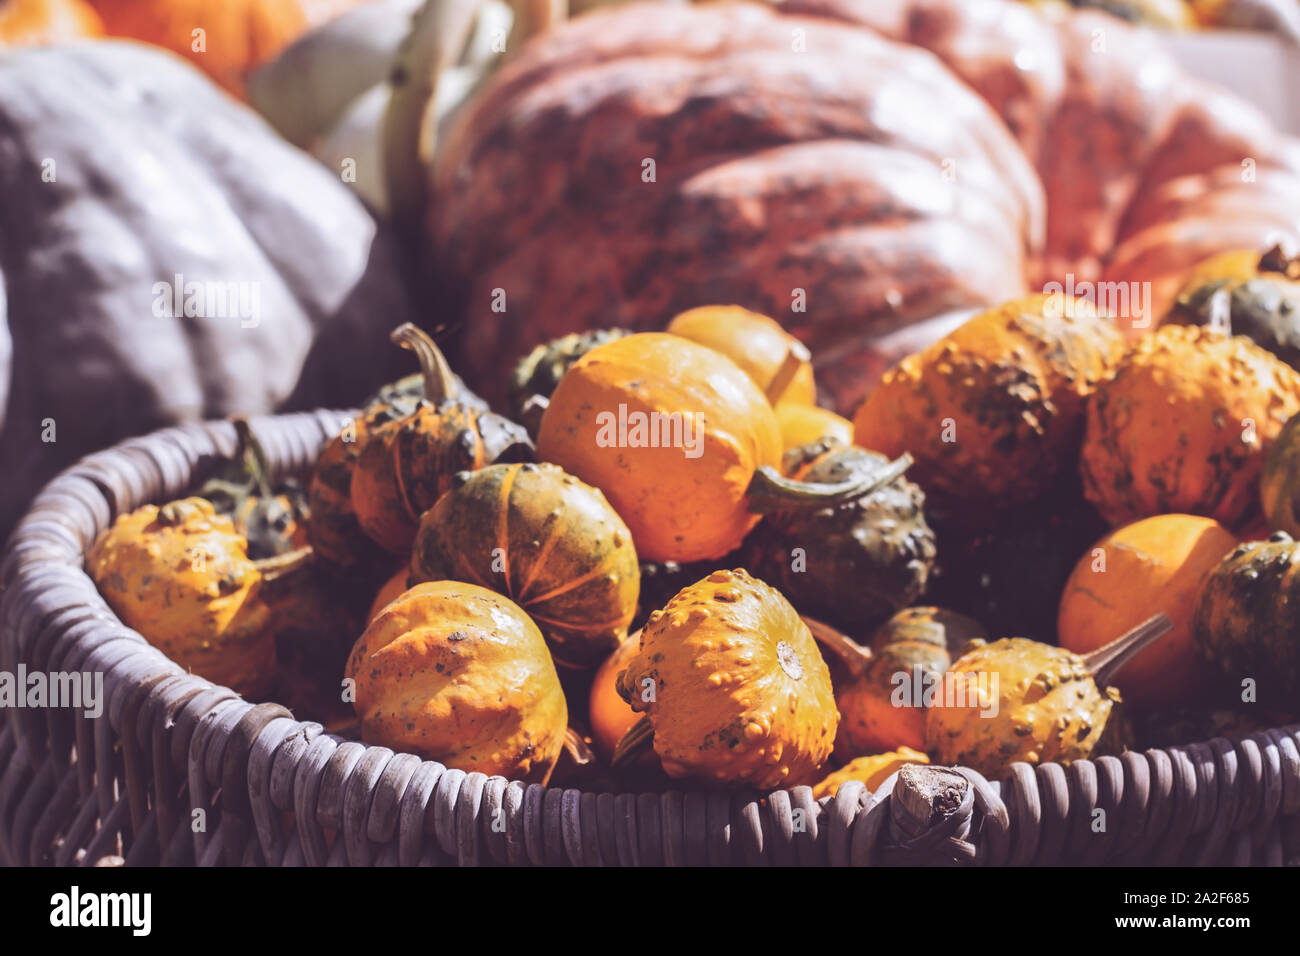 Bunch of decorative mini pumpkins and gourds in baskets on farmers market; autumn background Stock Photo